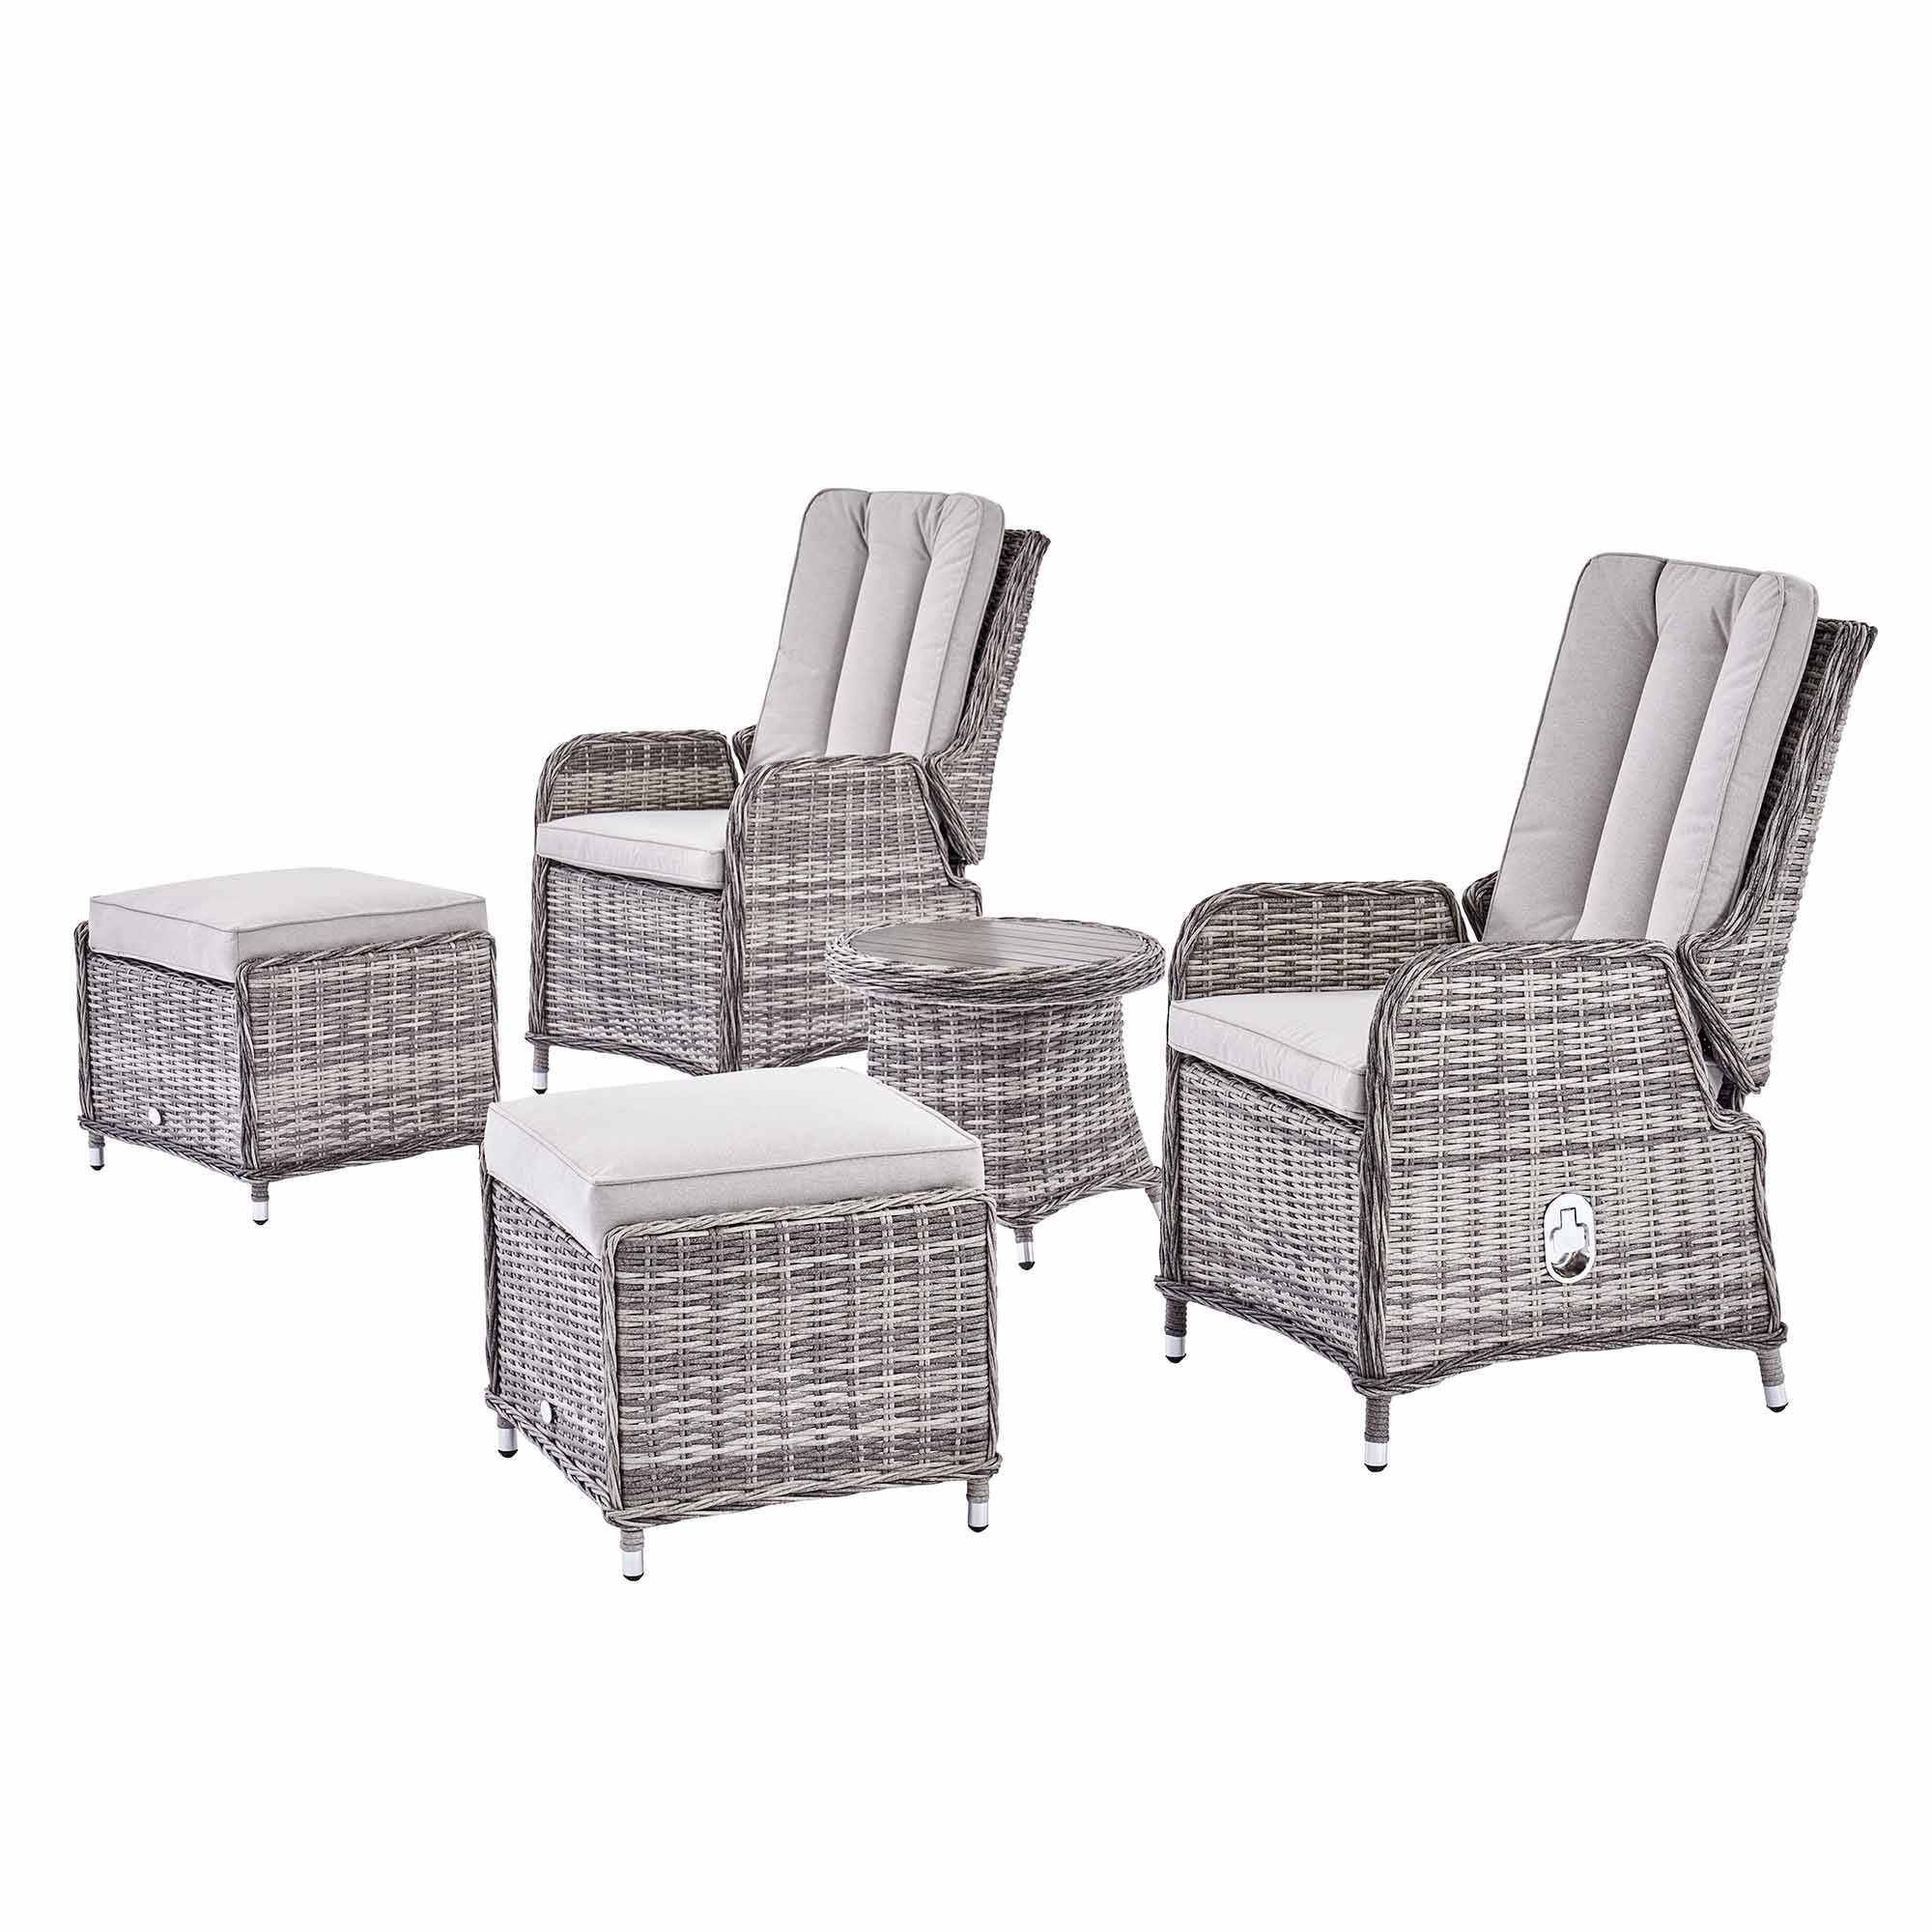 Hampshire 2-Seater Round Wicker Reclining Bistro Set with Stools, Light Grey